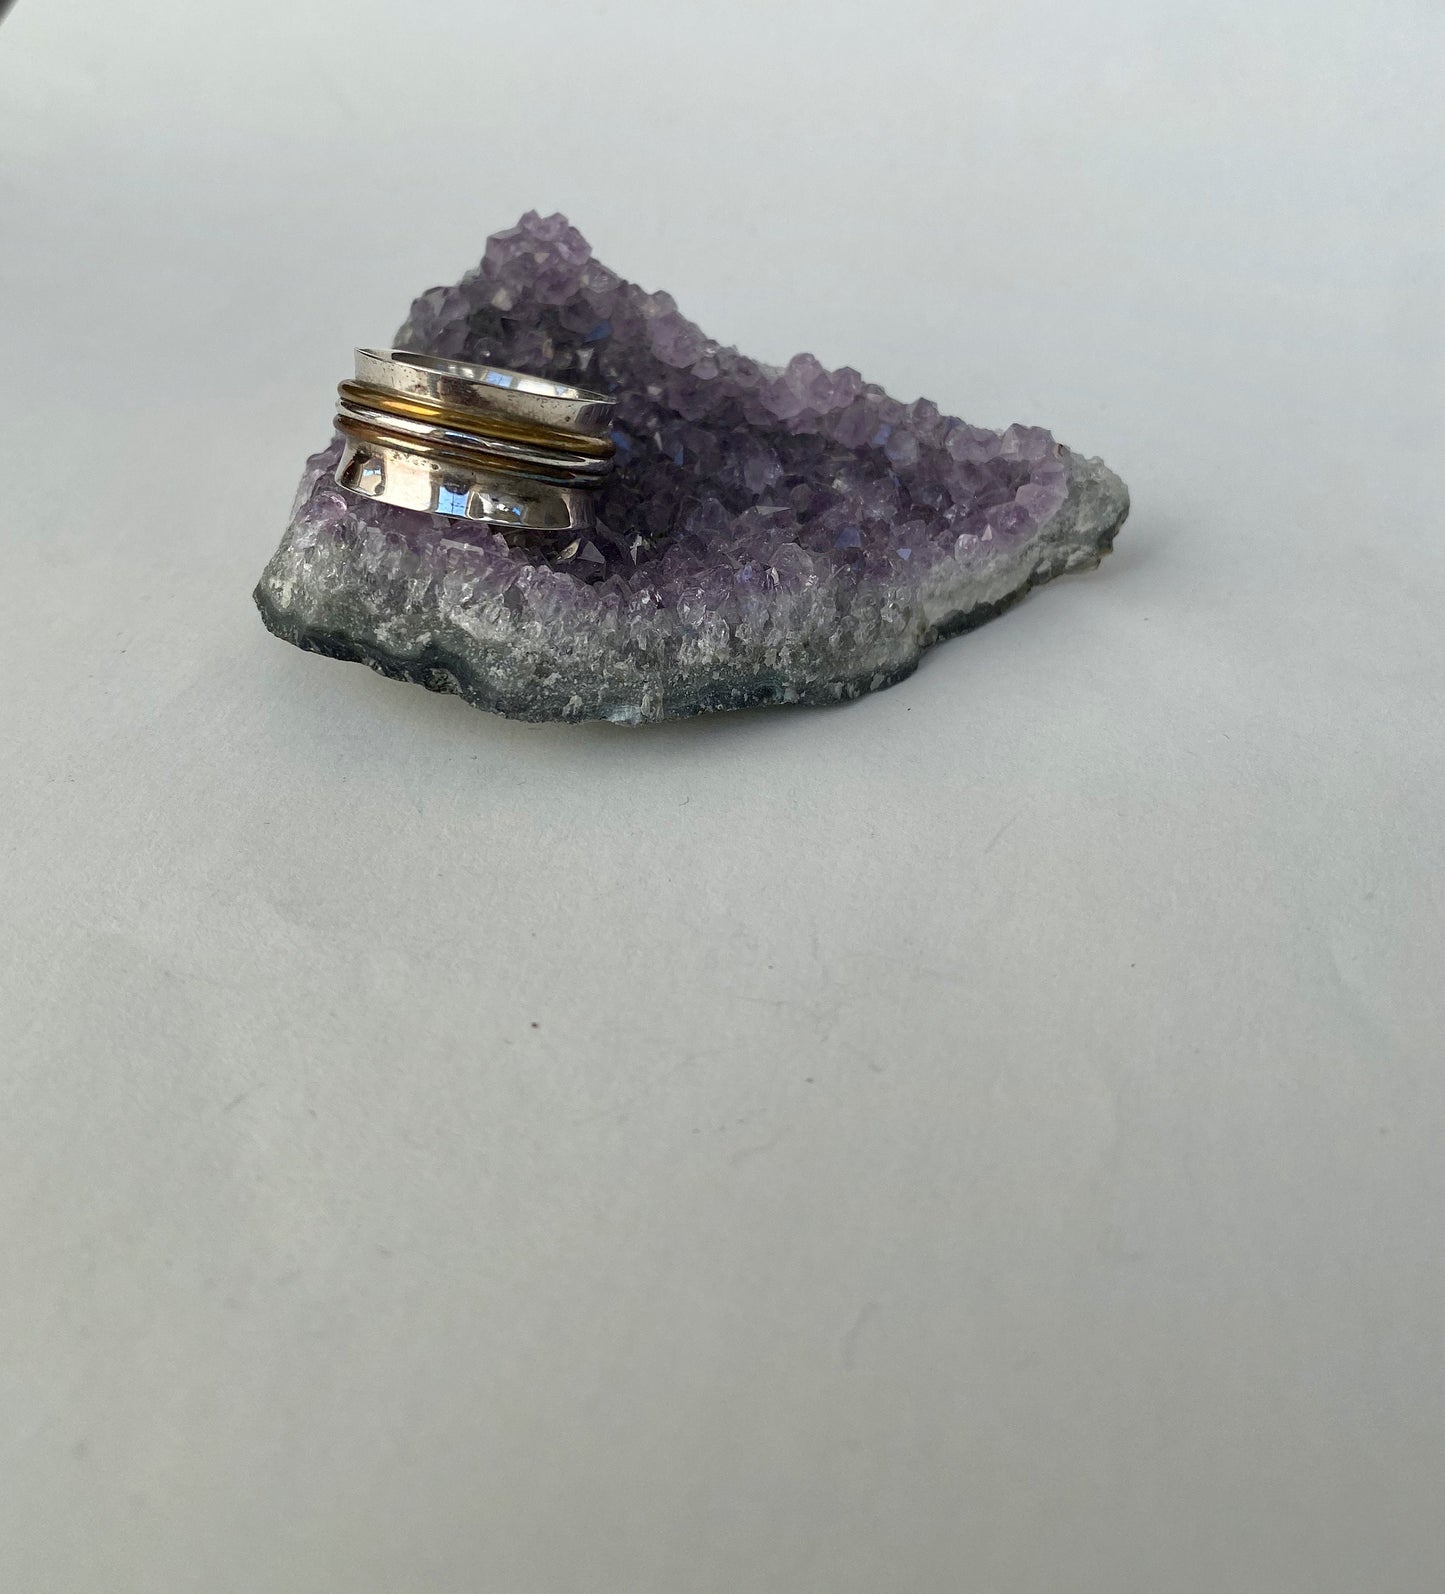 Handmade size 8 gorgeous sterling silver, copper and brass spinning ring.